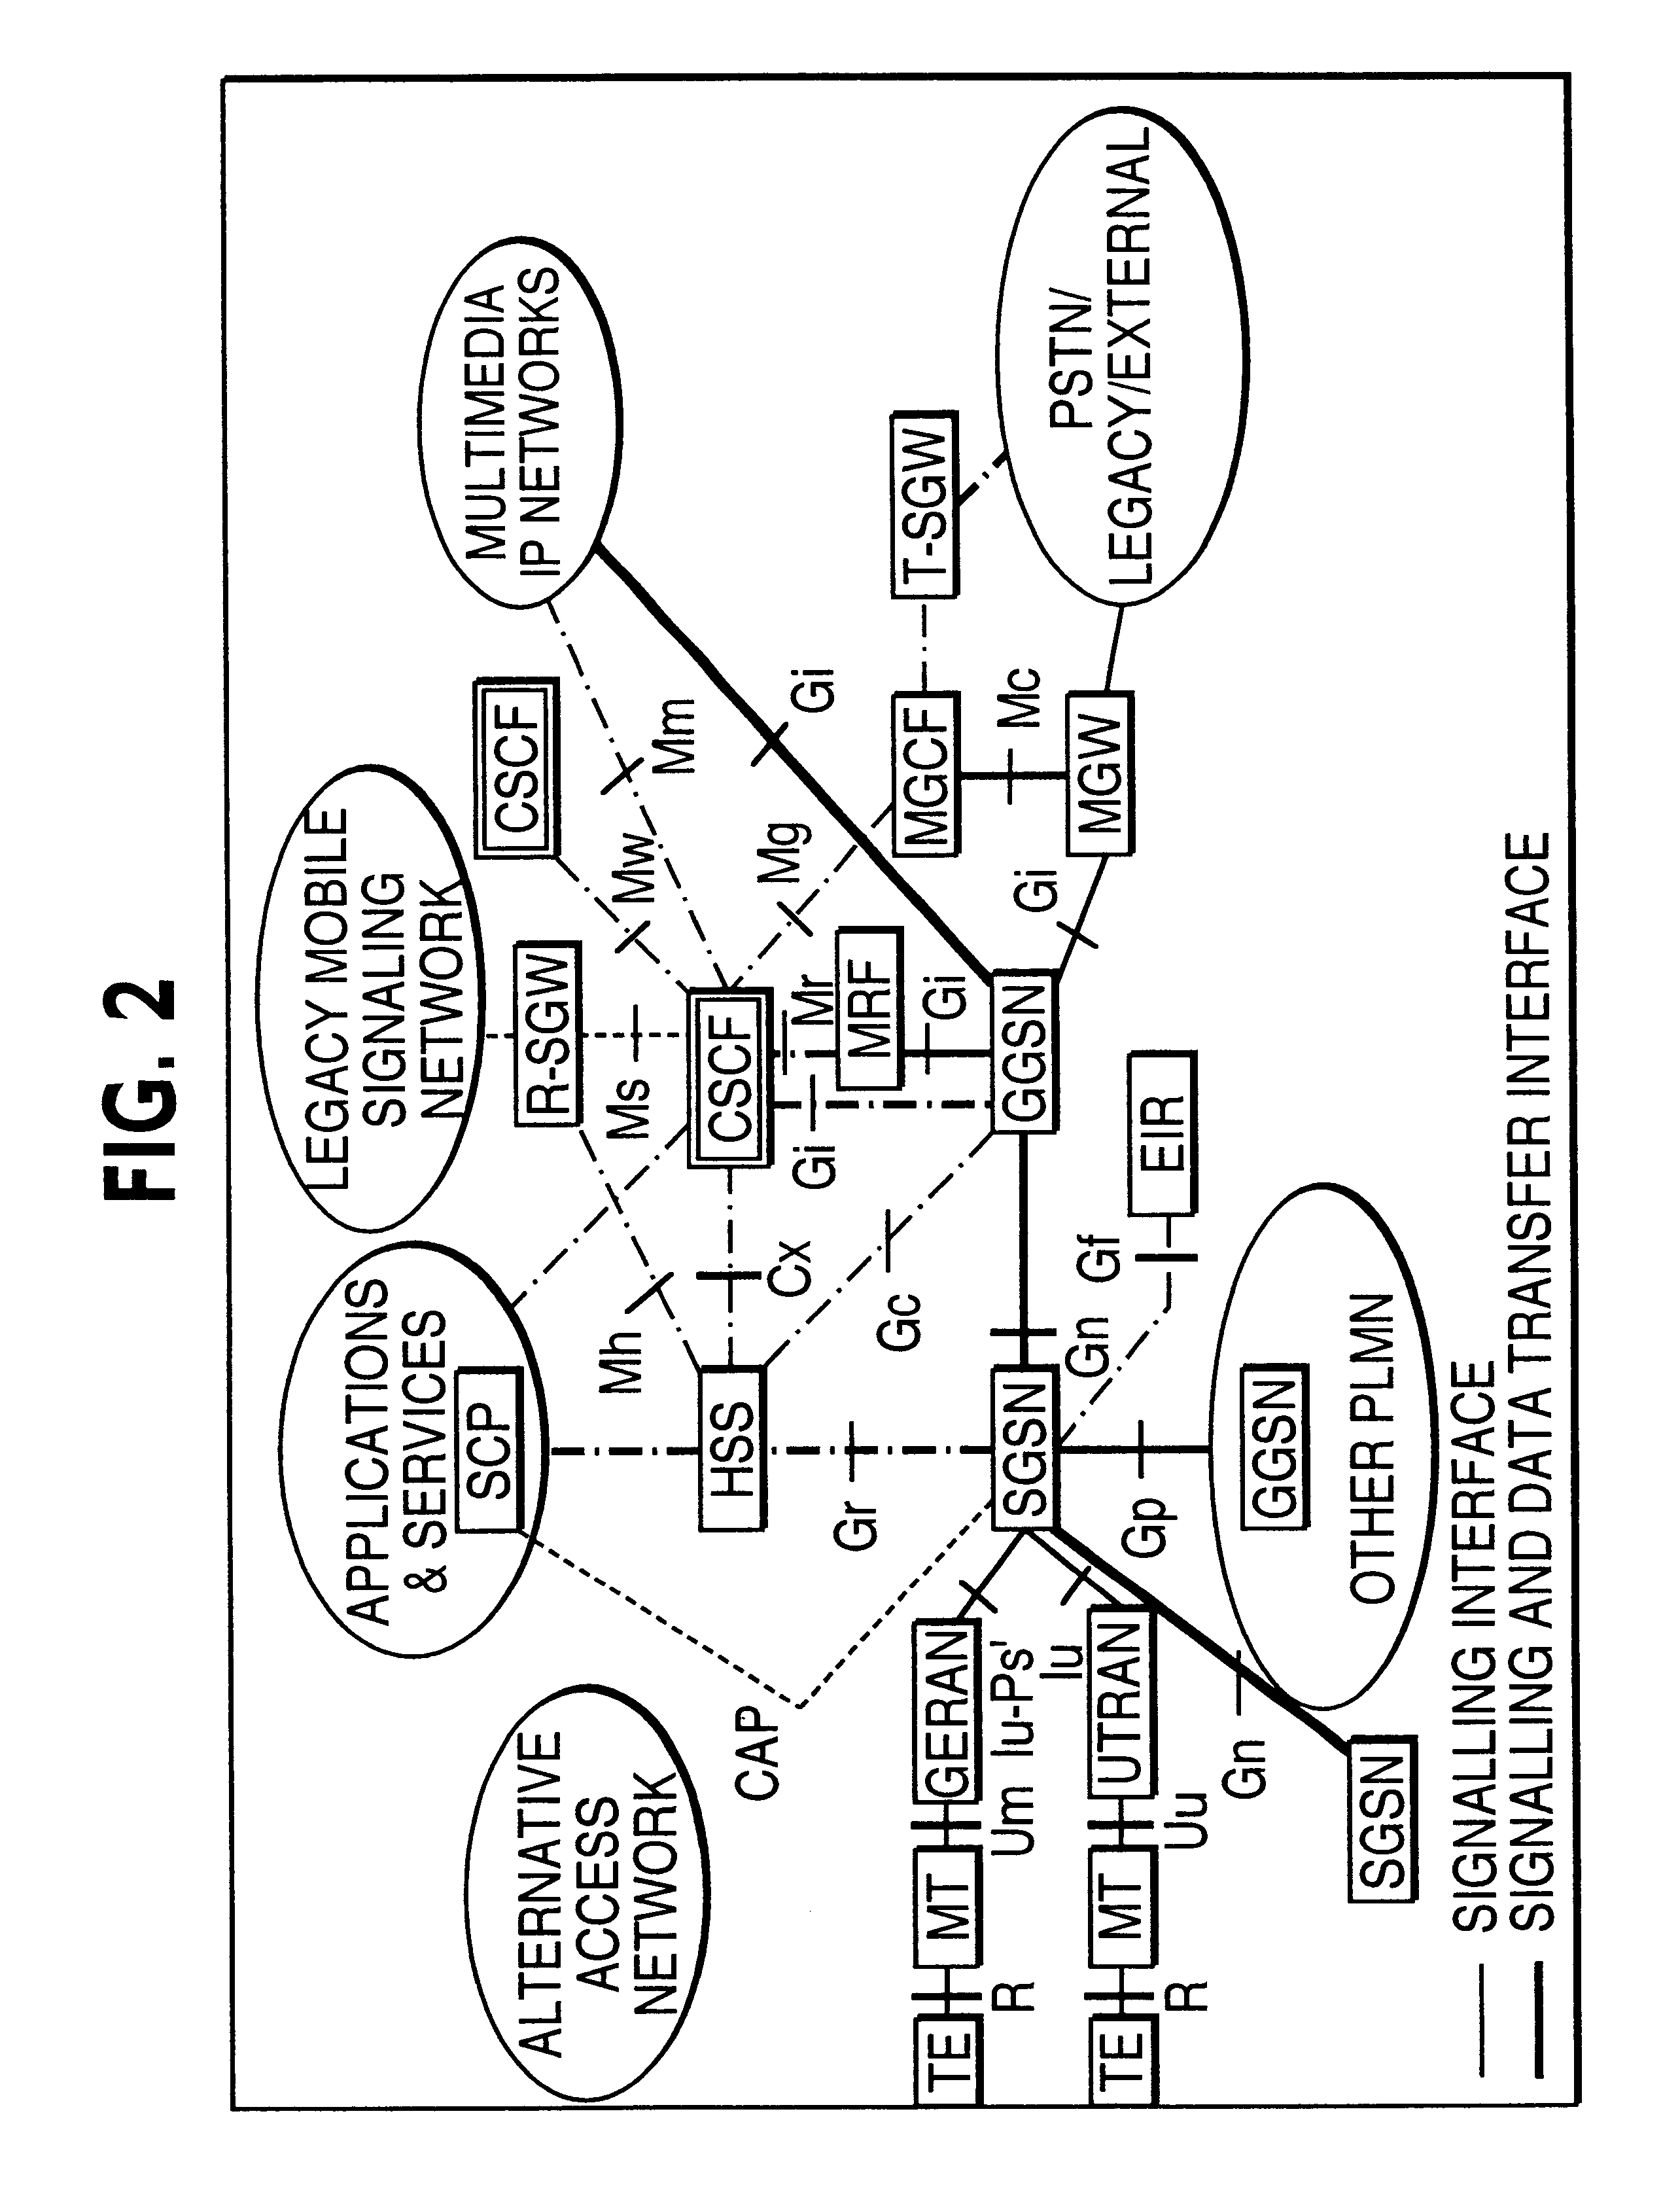 Session or handoff methods in wireless networks